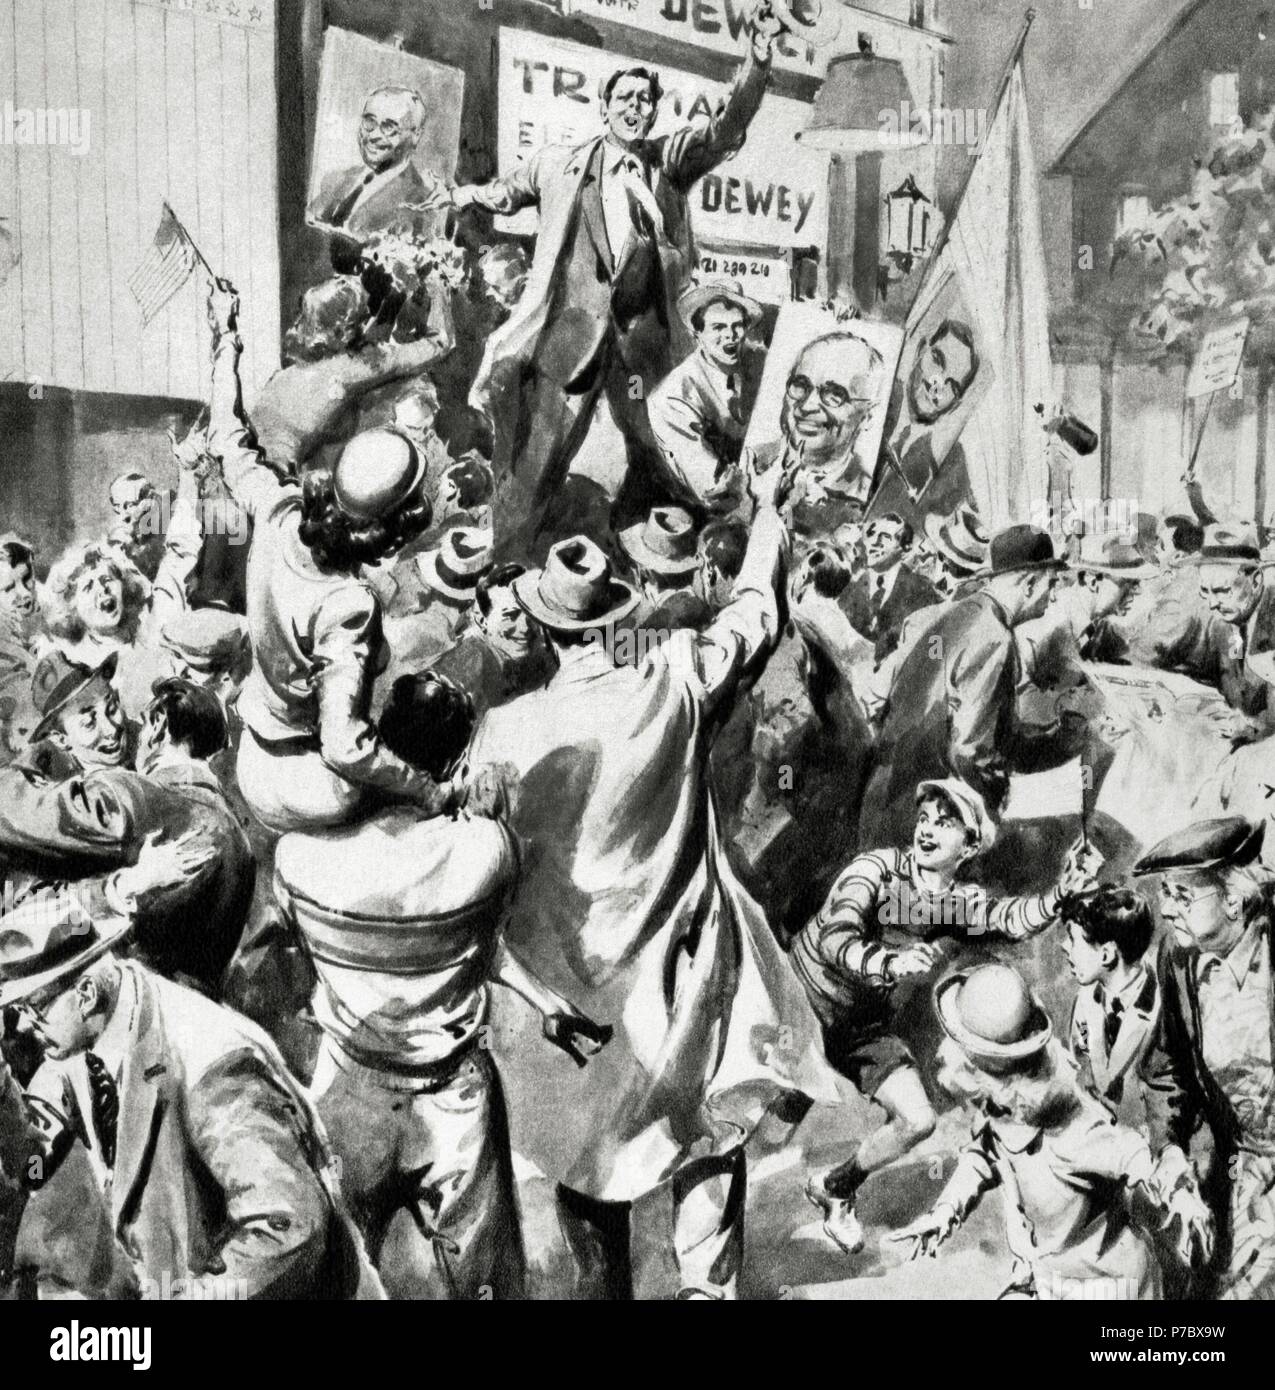 The United States. 20th century. Celebration of the election results in 1945 with the victory of Harry S. Truman (1884-1972) as a new President (1945-1953). Engraving. La Domenica del Corriere. Stock Photo